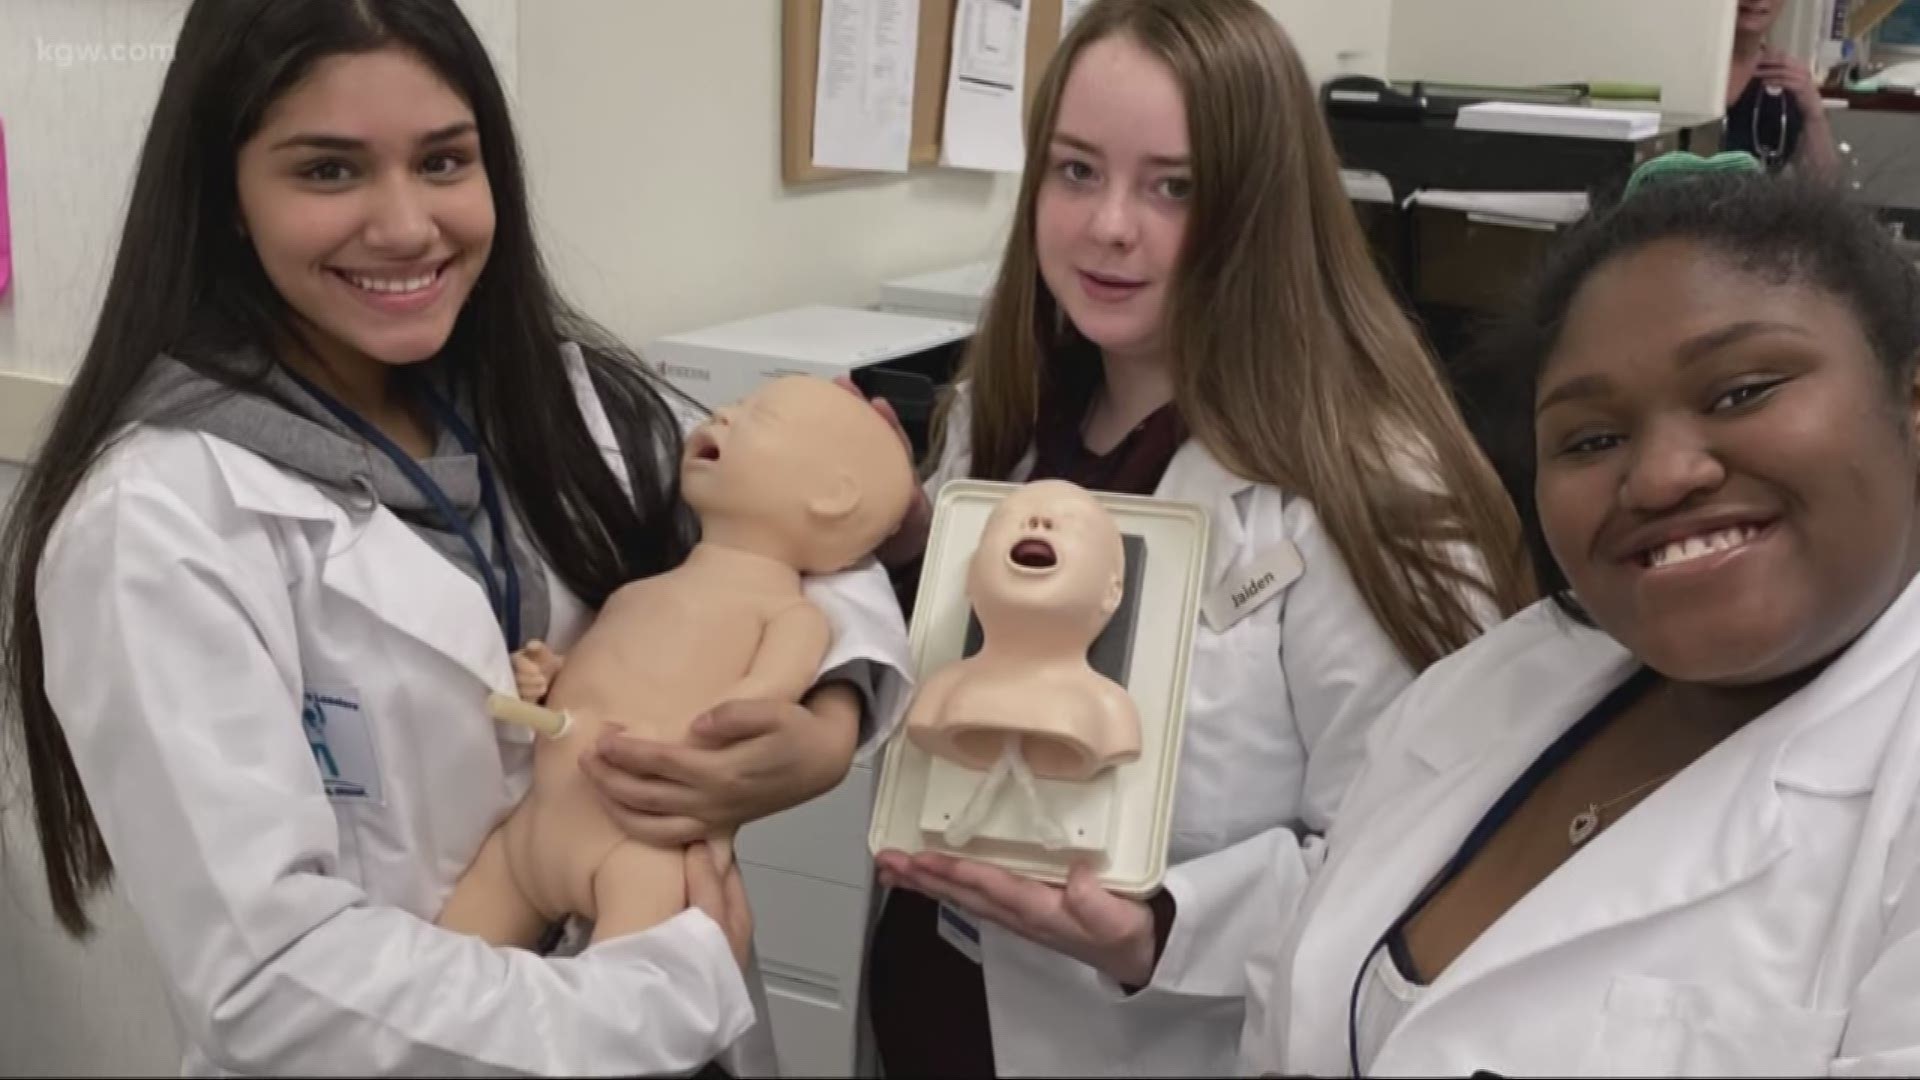 Program helps students learn about medical field opportunities.